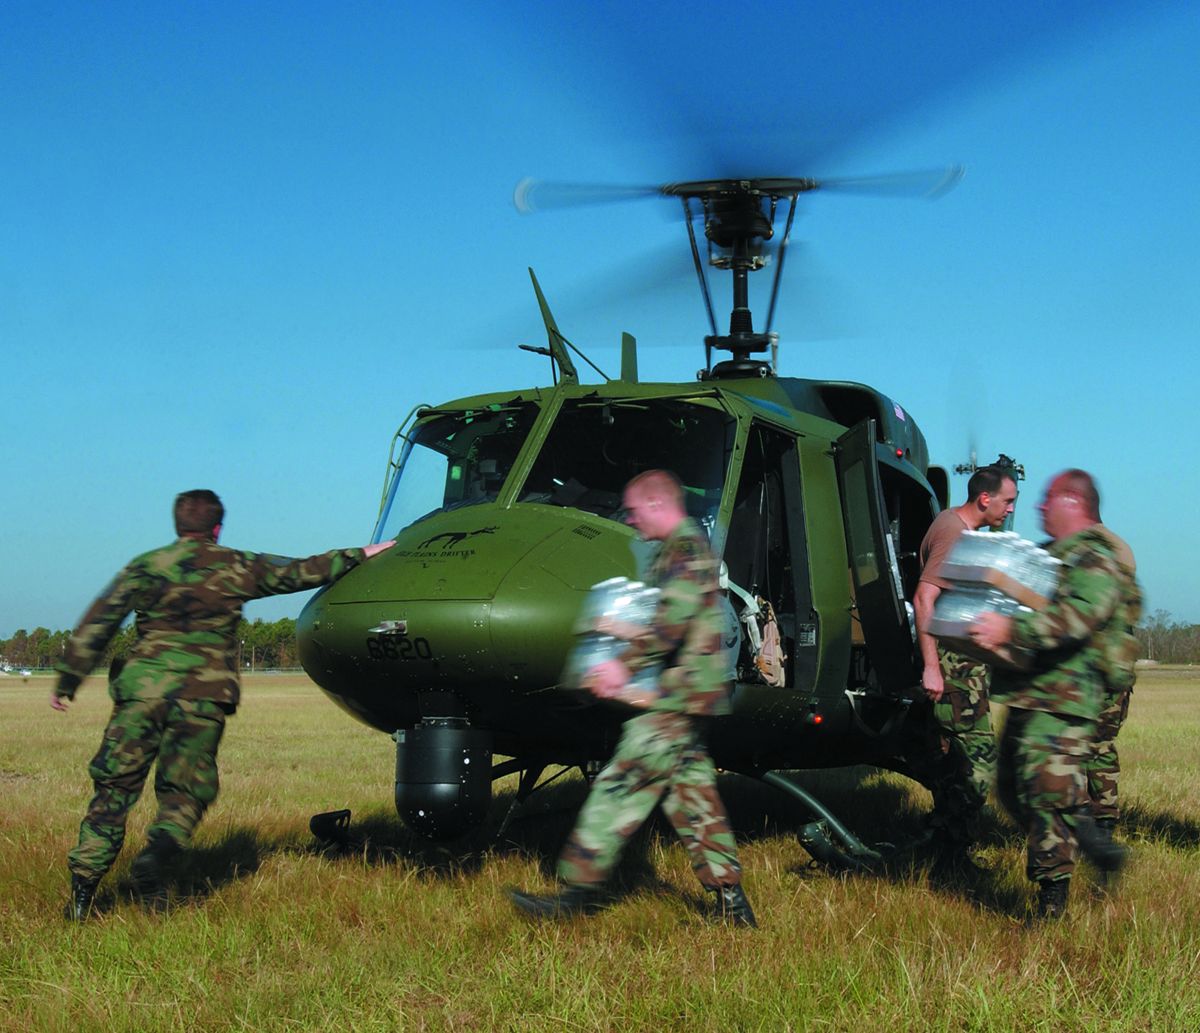 Members of Joint Task Force Katrina load precious water supplies onto a UH-1N Huey in Gulfport, Mississippi, after the disastrous 2005 hurricane.